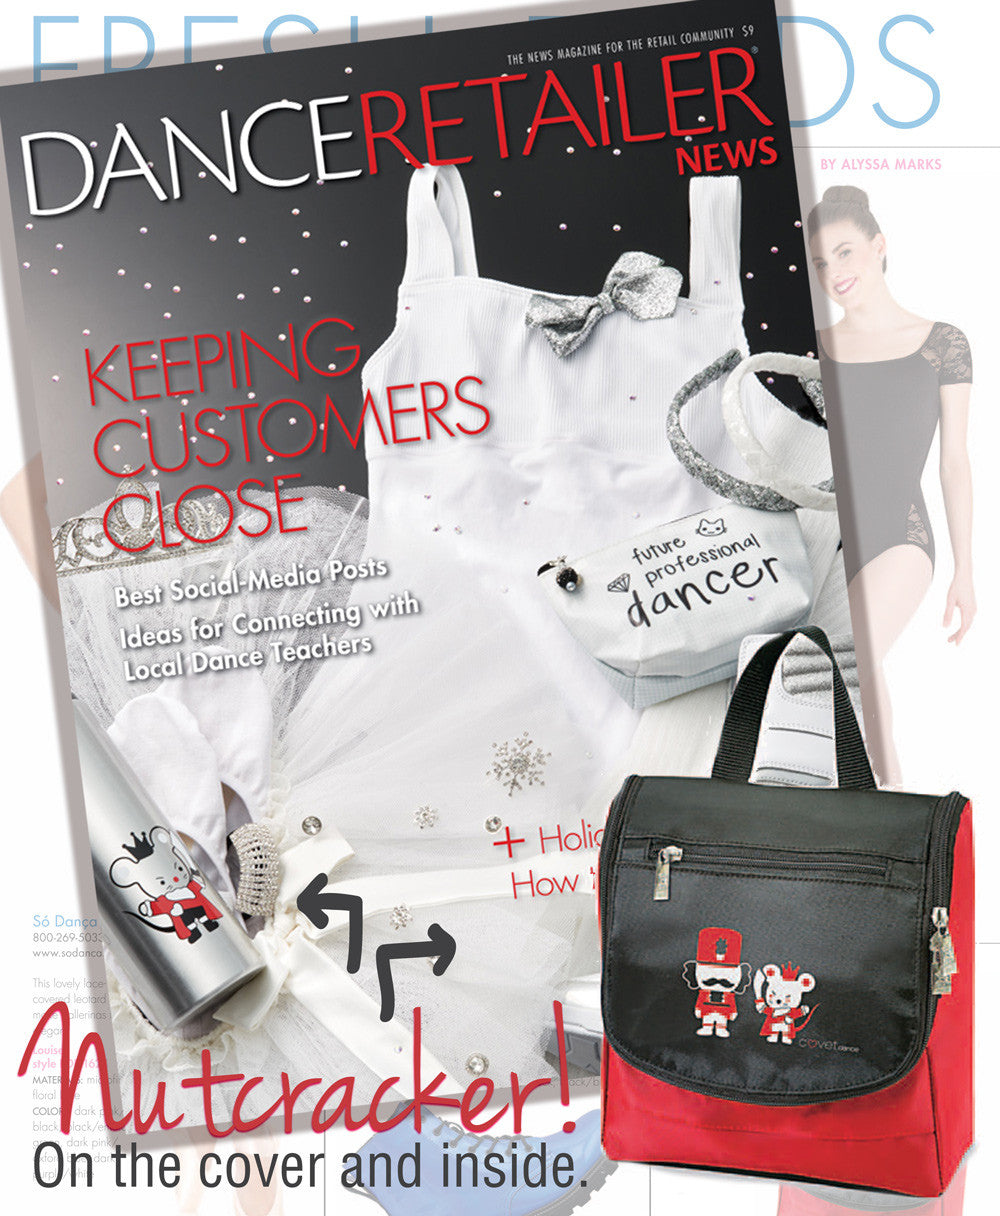 Nutcracker and Mouse King Made The Cover (and inside) of Dance